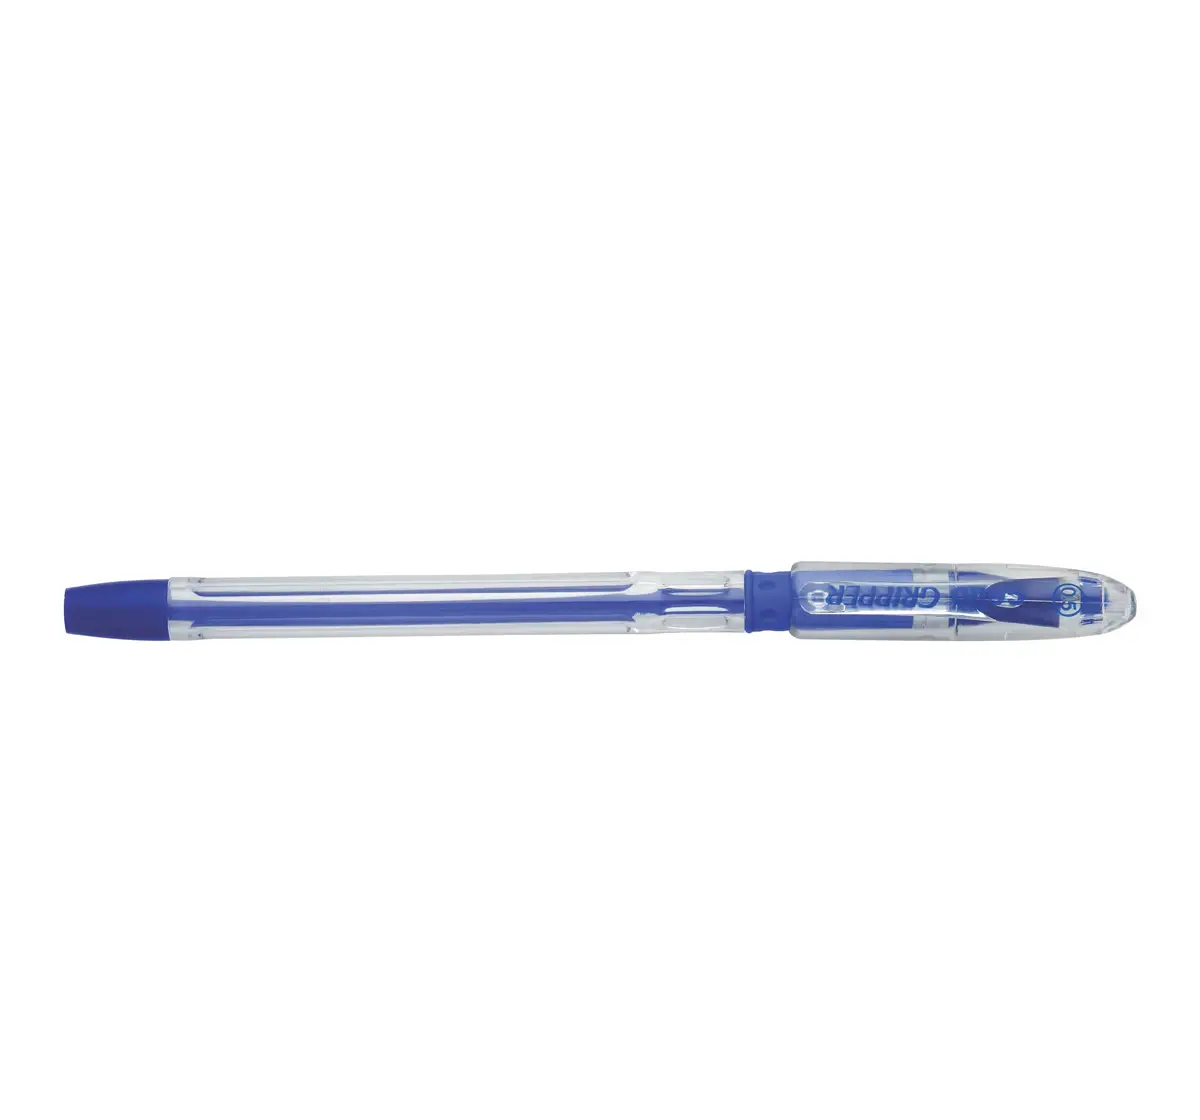 Cello Writing pen 0.5 mm fine with Grip Blue 5Y+